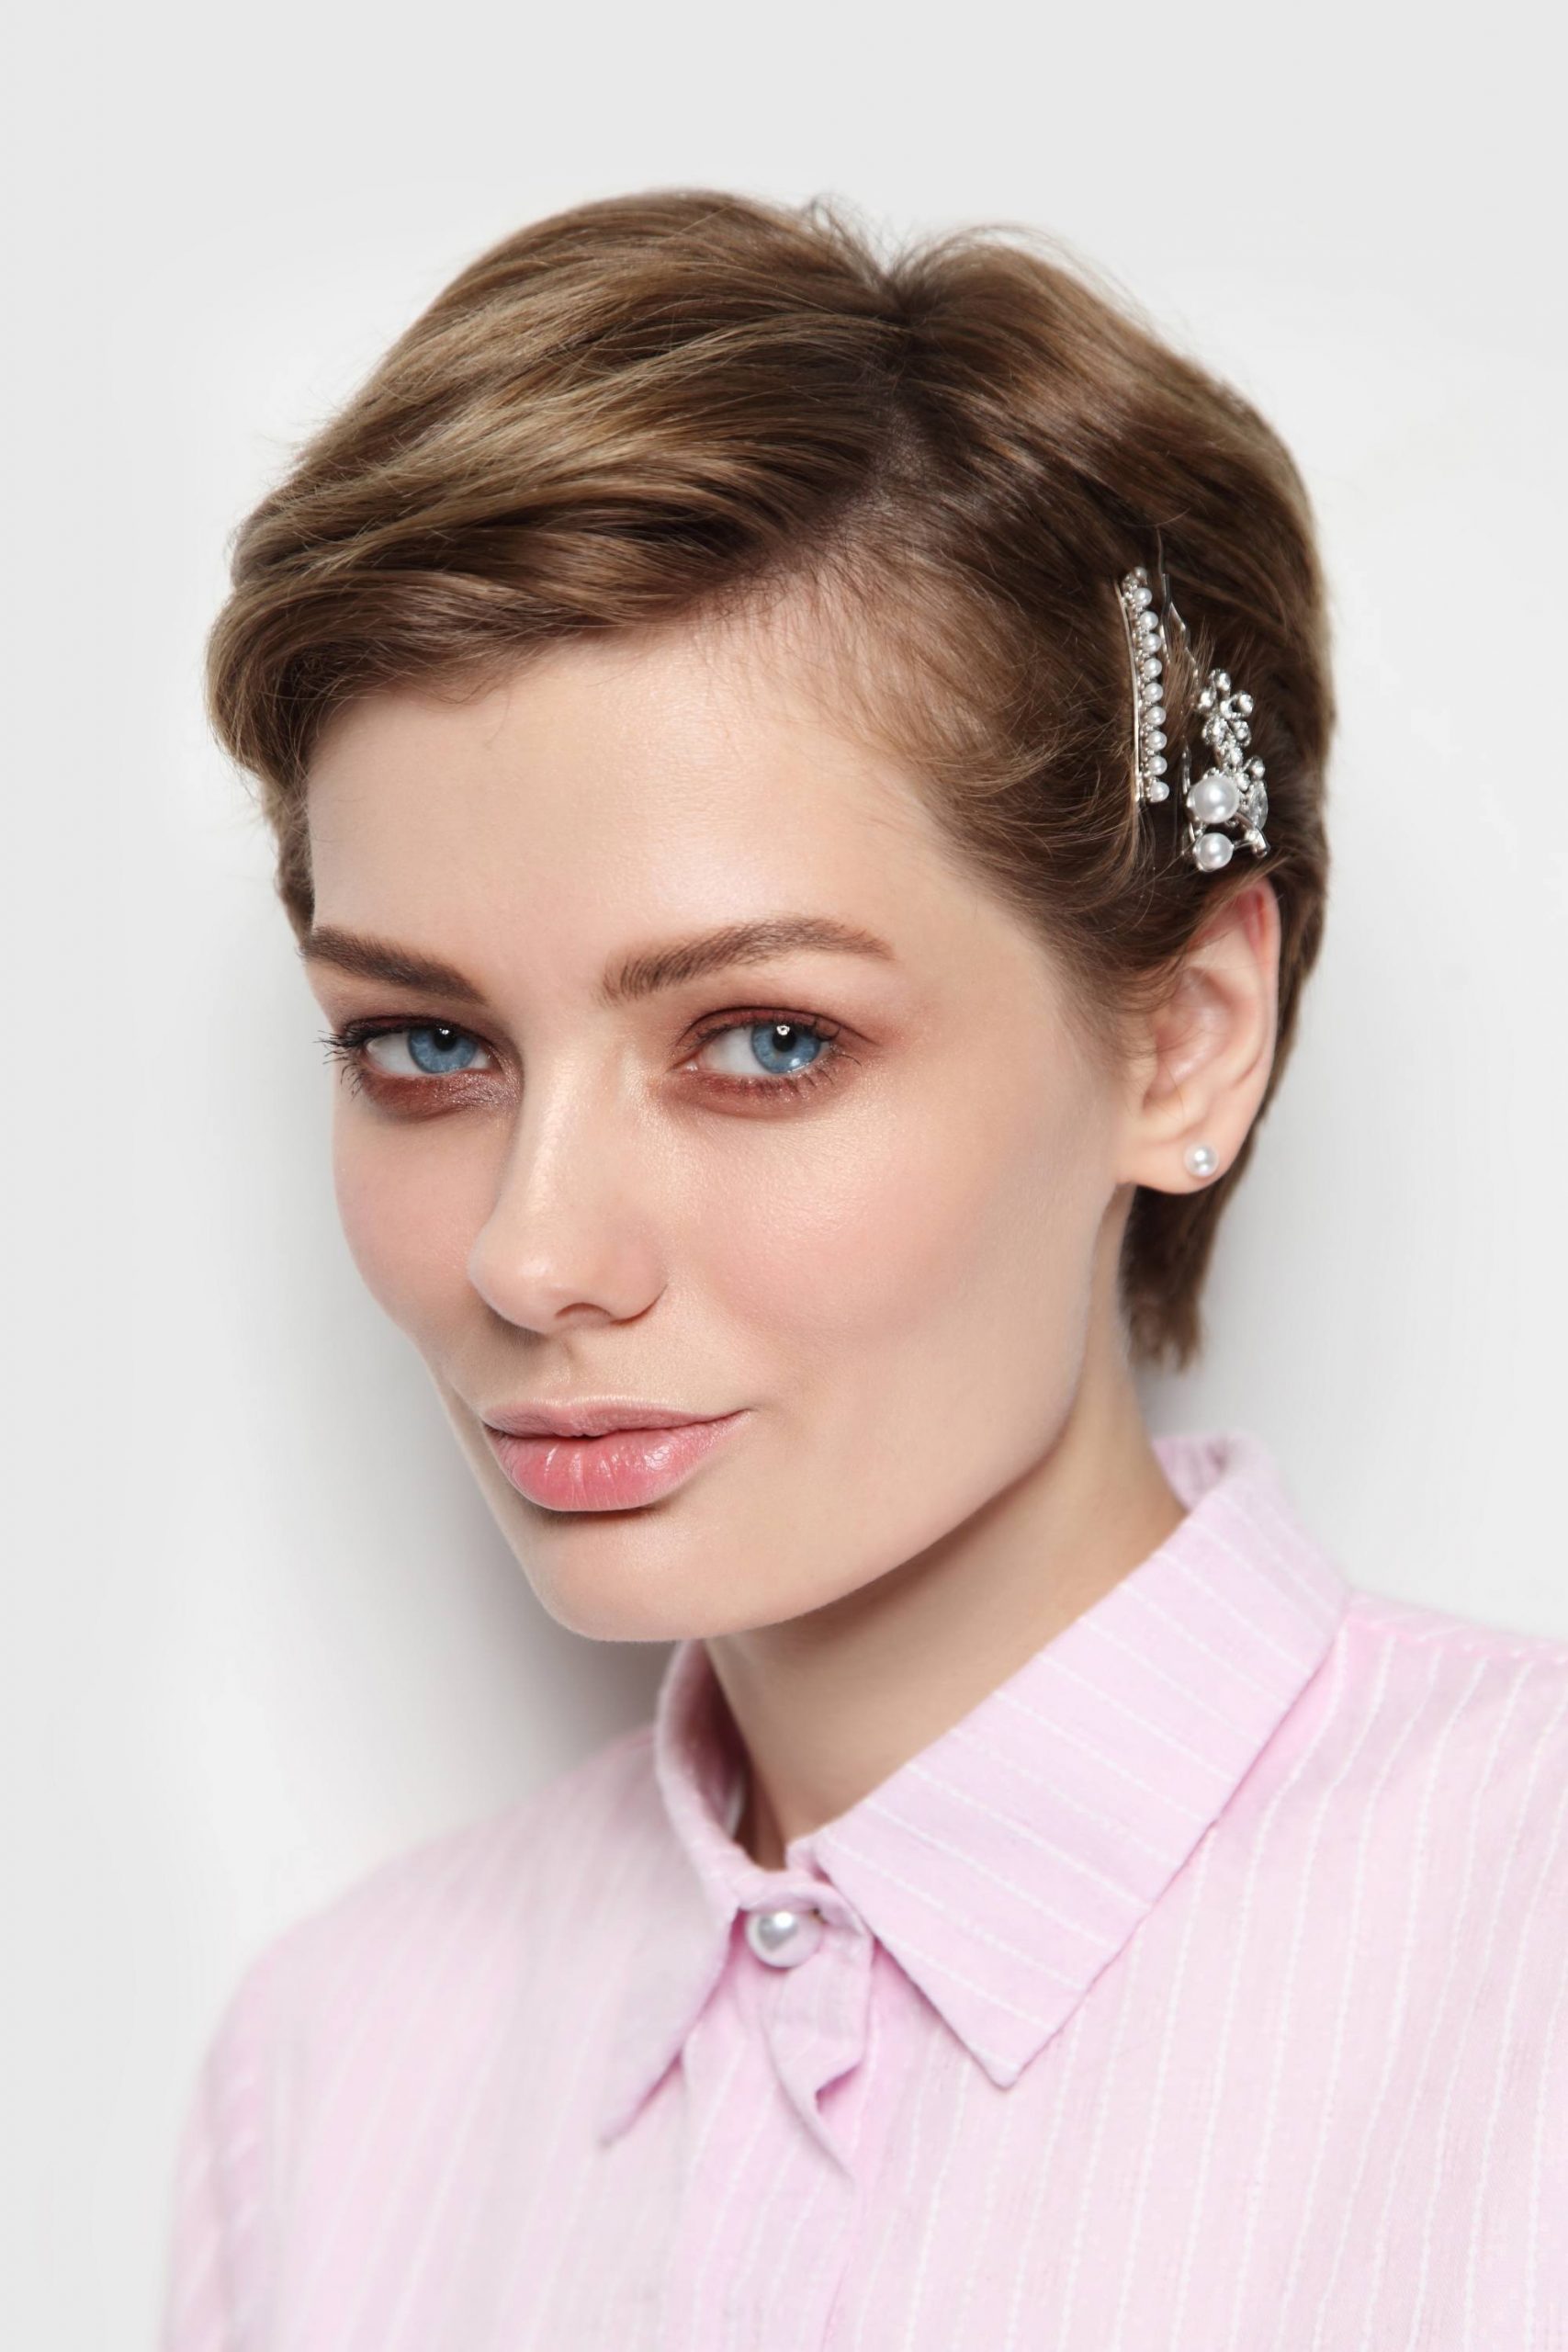 Pixie Haircut with Clips